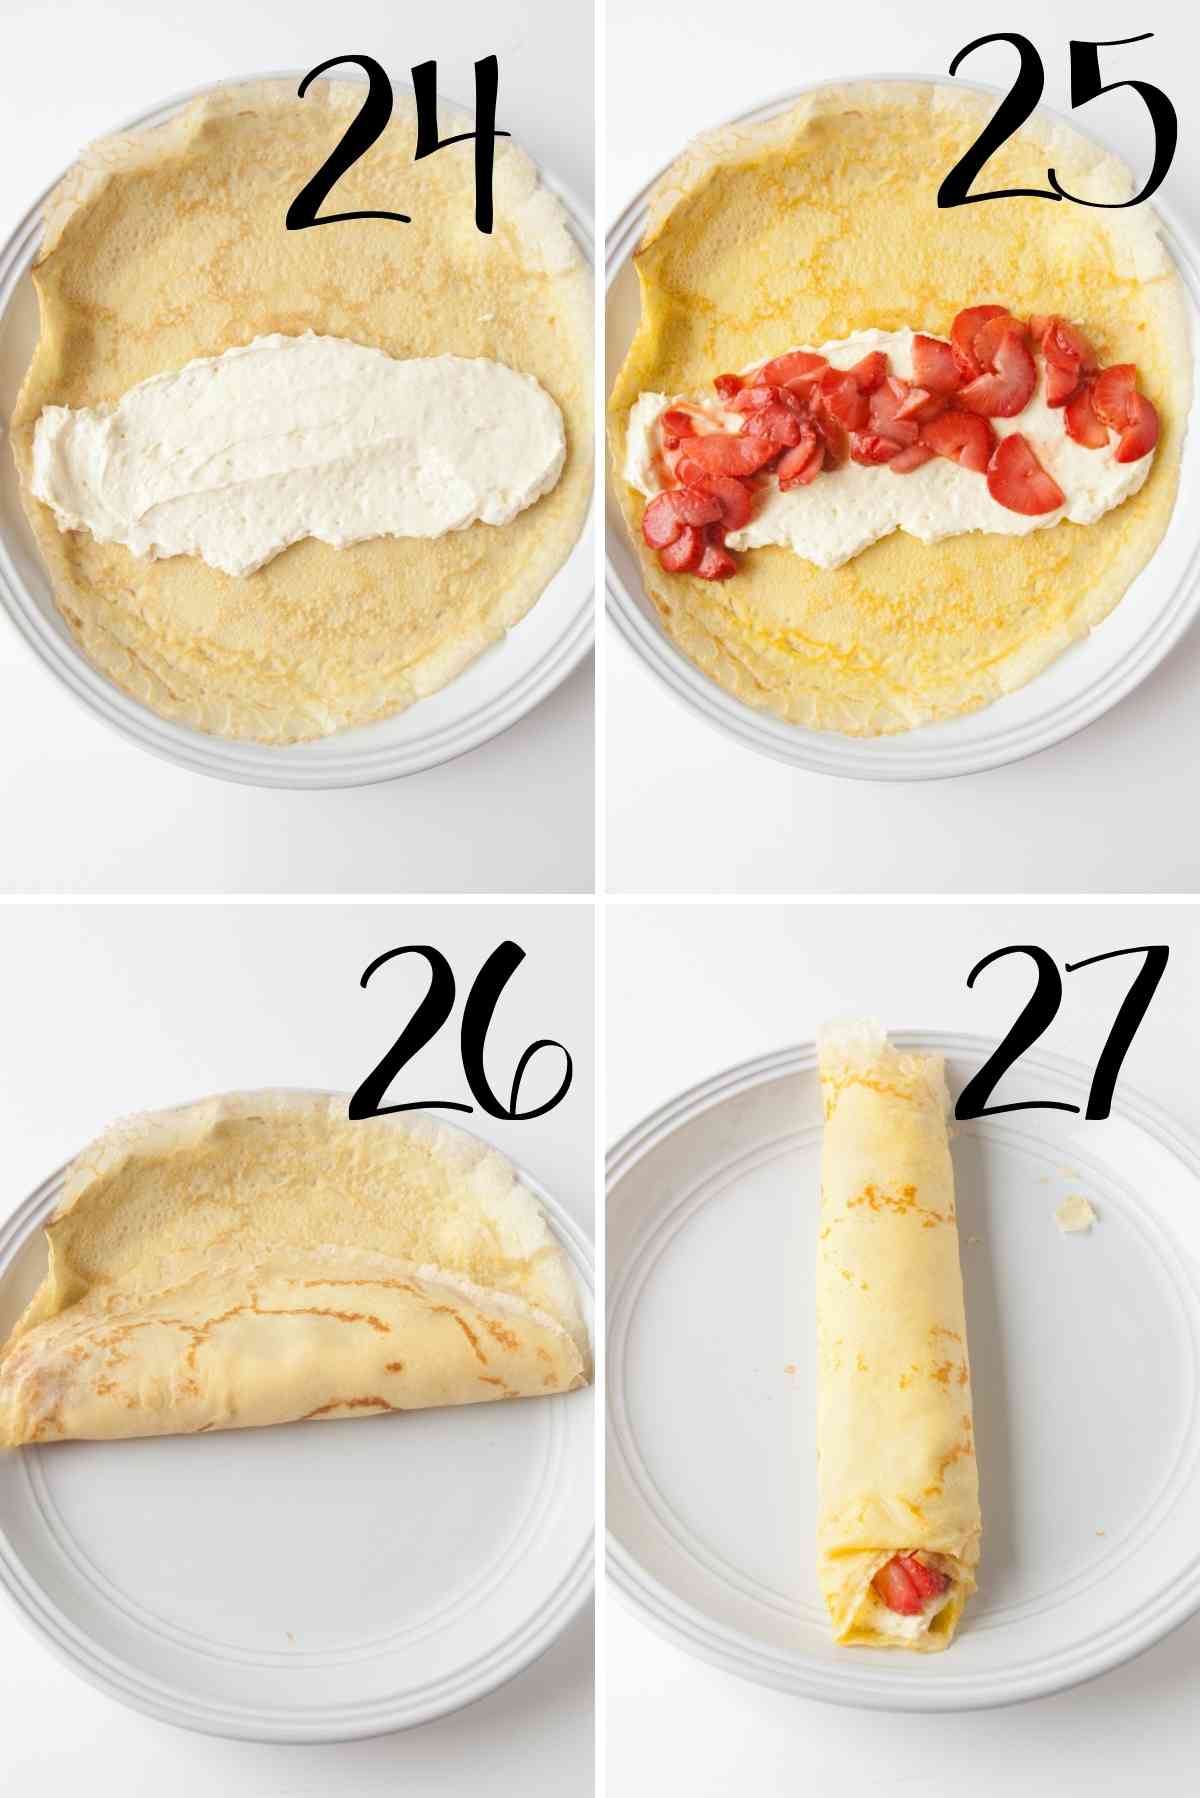 Filling and rolling up crepes.